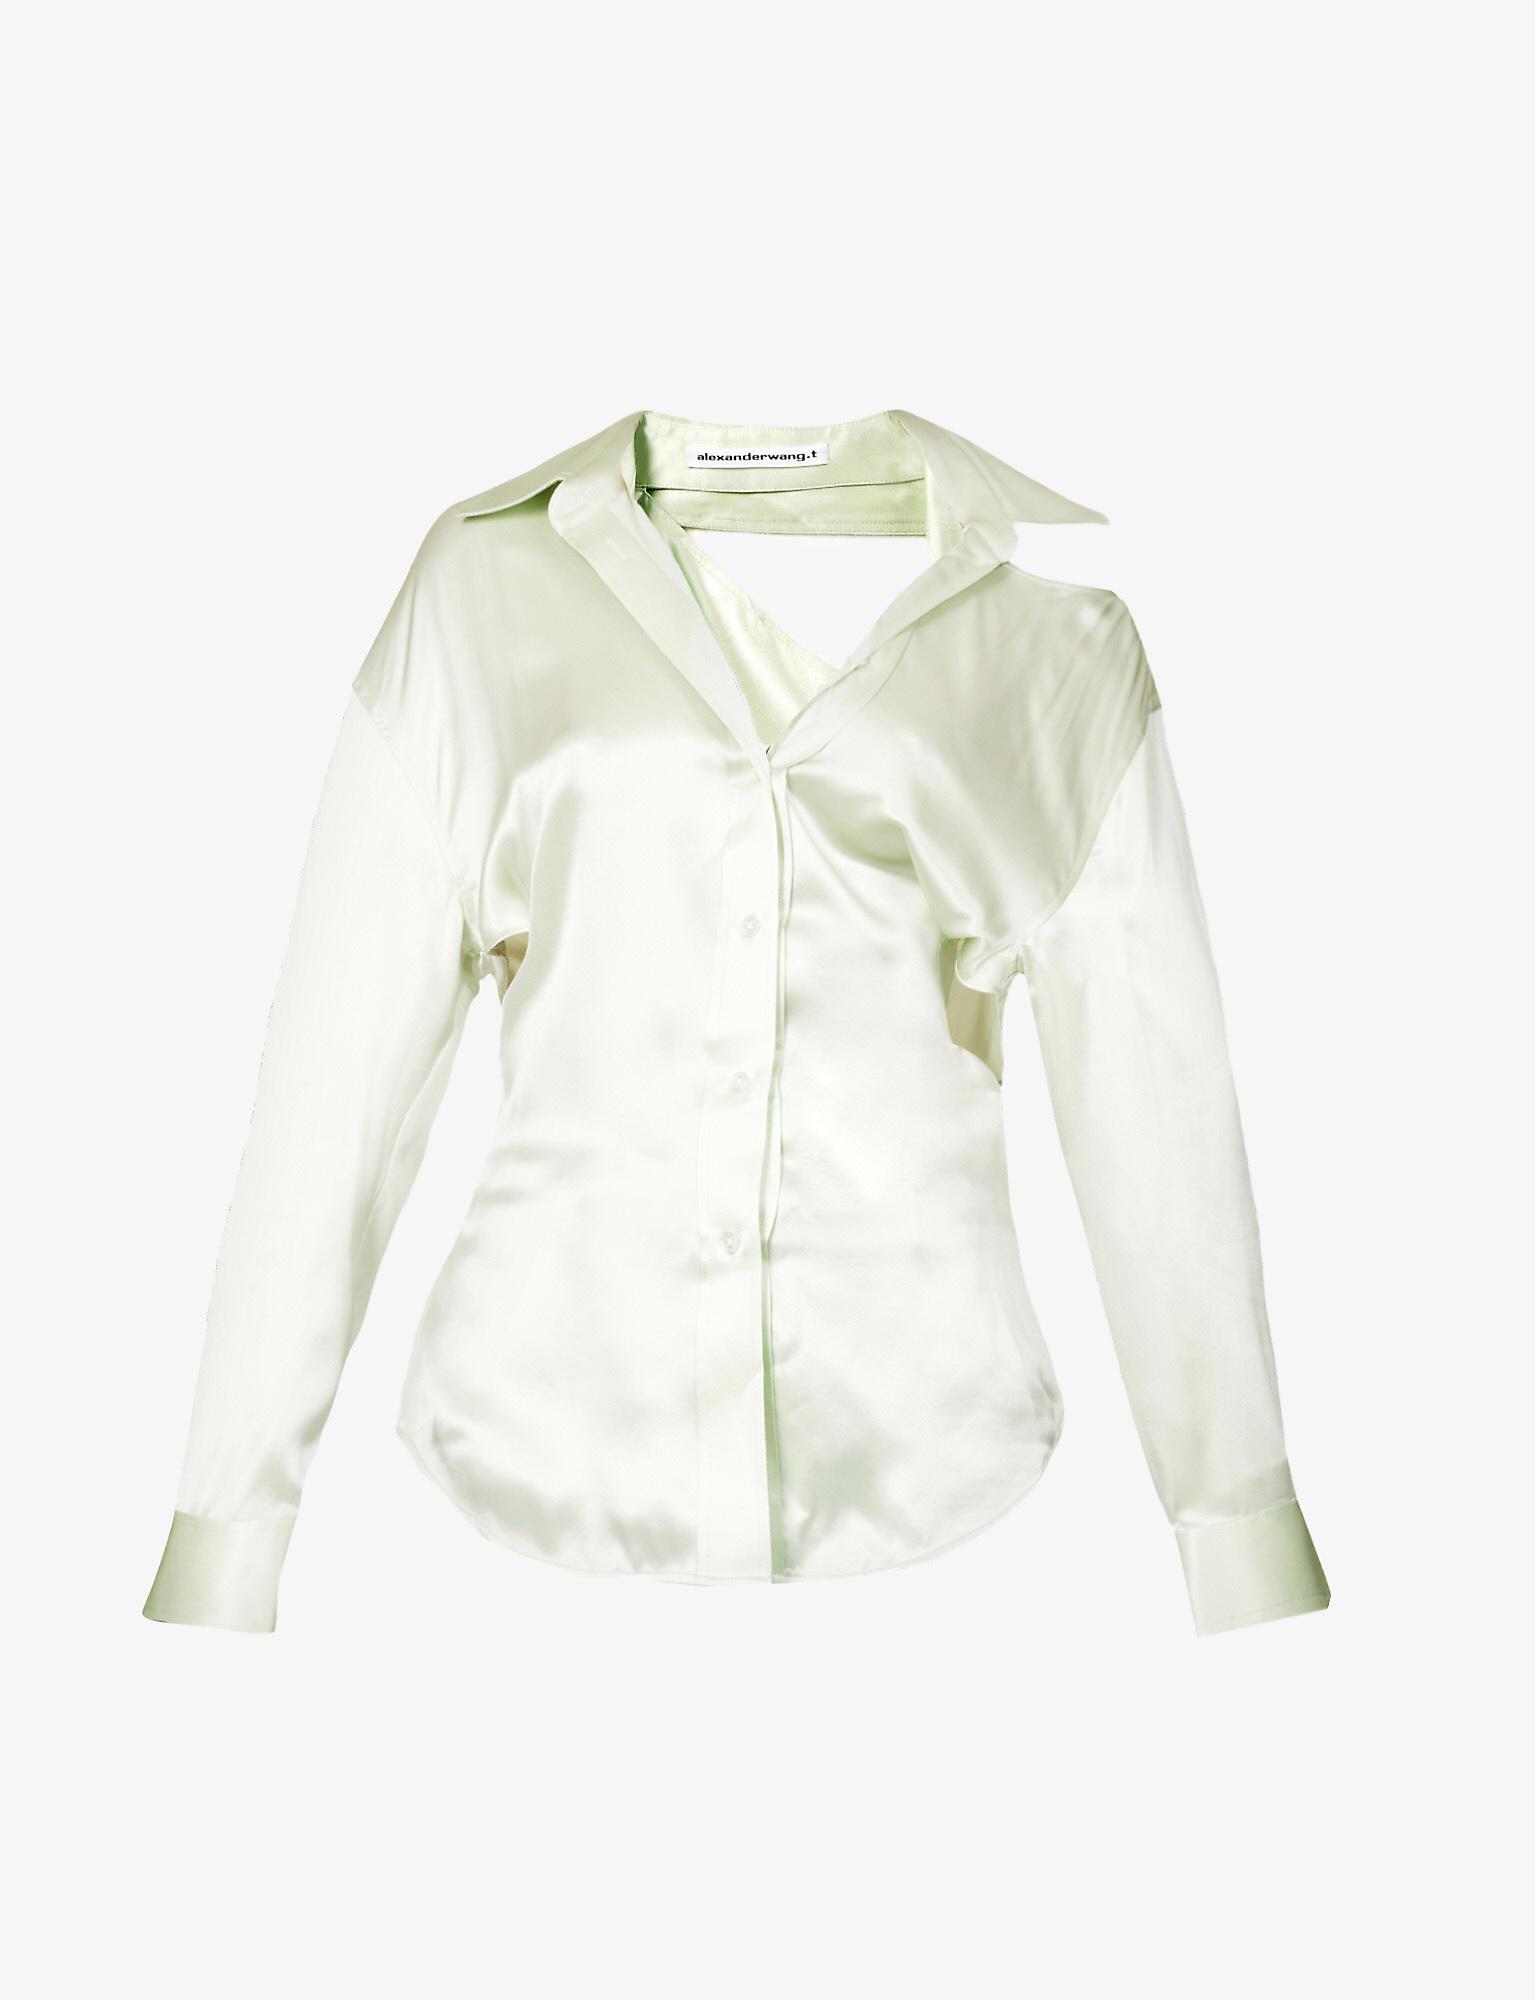 Alexander Wang Cut-out Exposed-shoulder Silk Shirt in White | Lyst